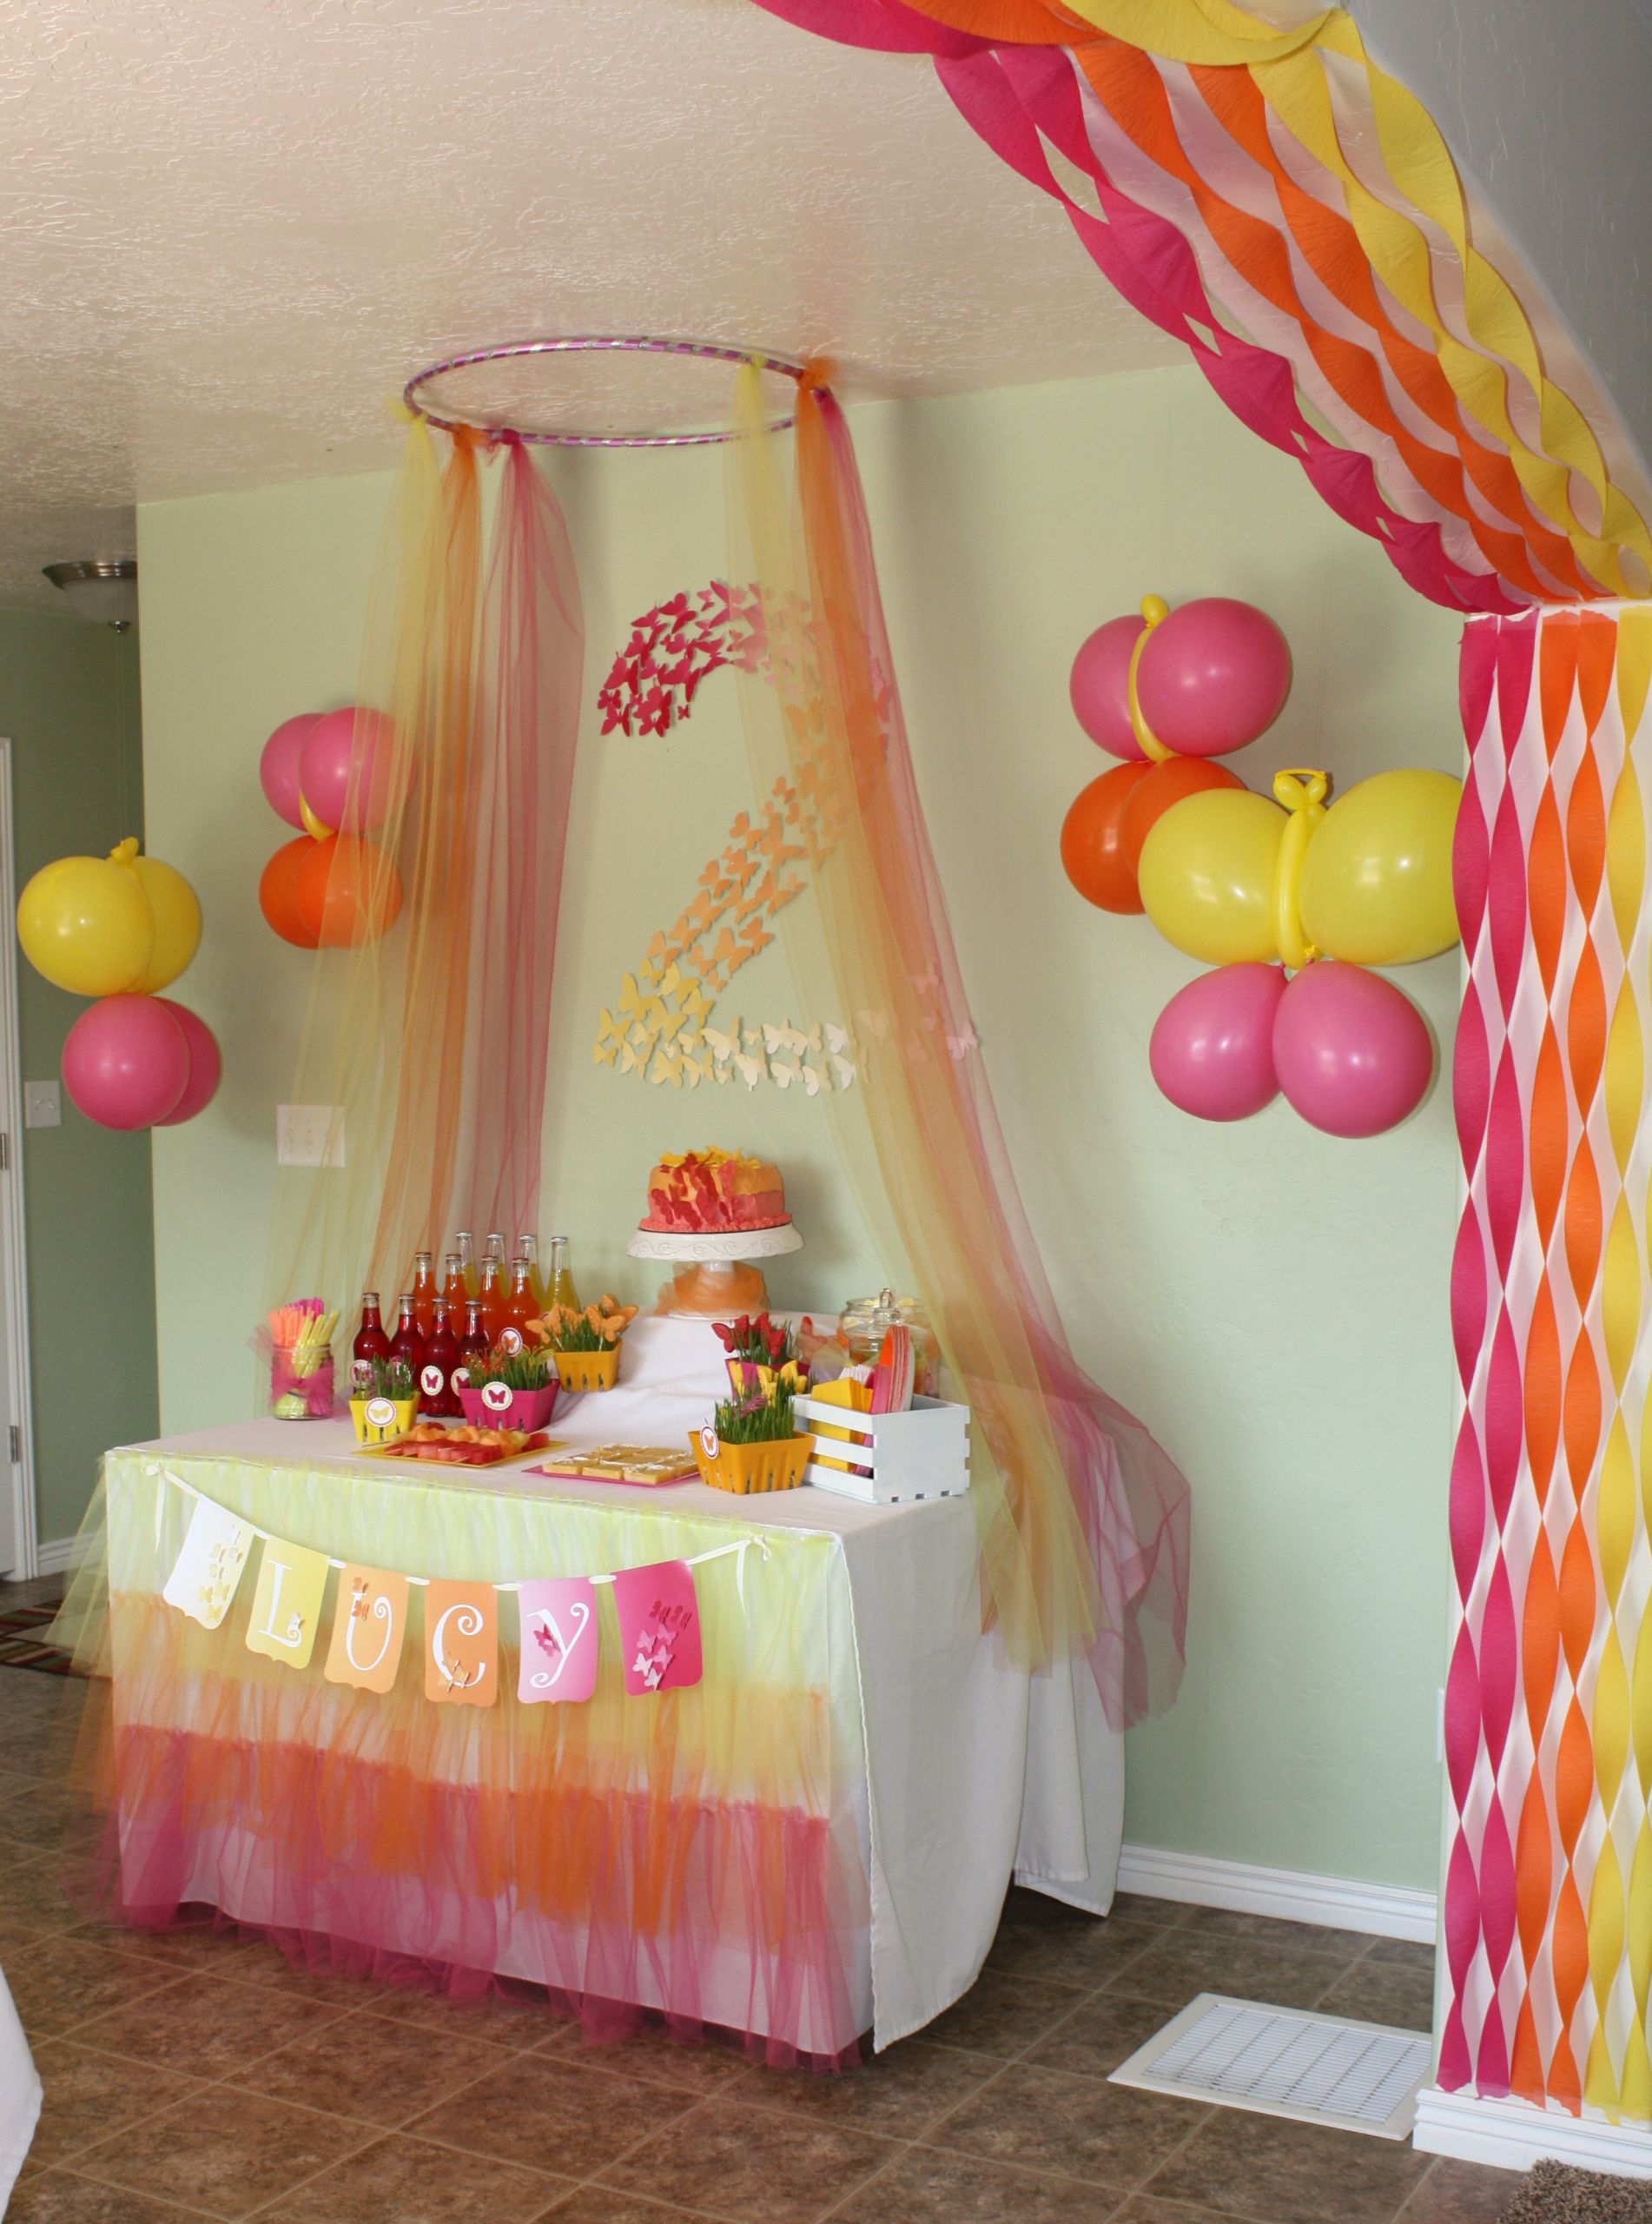 Decorating Ideas For Birthday Party
 Butterfly Themed Birthday Party Decorations events to